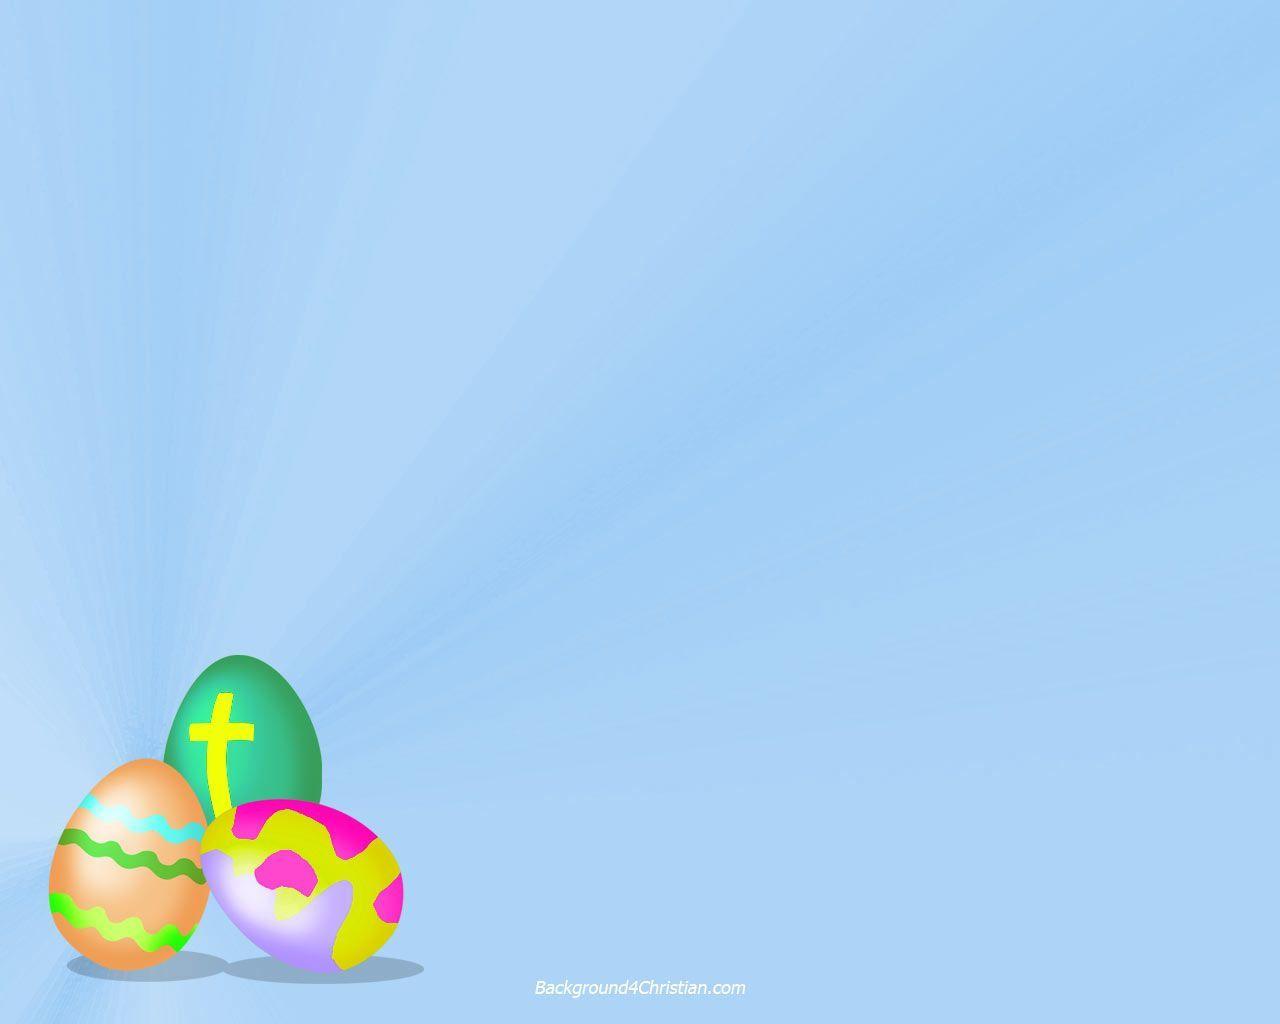 easter theme. Background 4 Christian